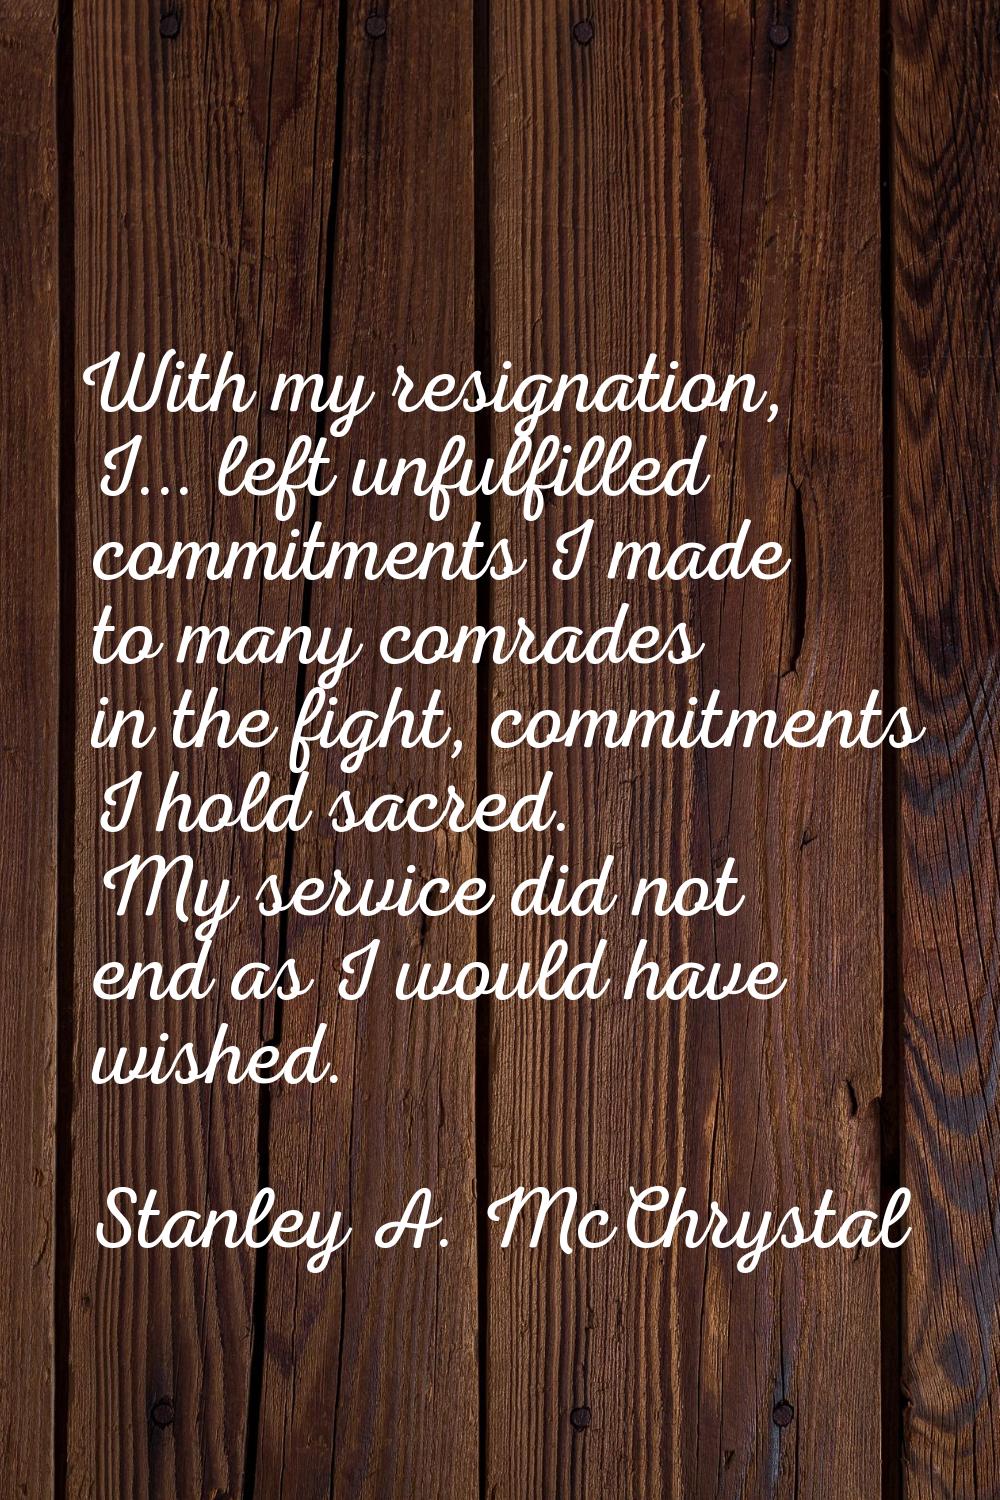 With my resignation, I... left unfulfilled commitments I made to many comrades in the fight, commit